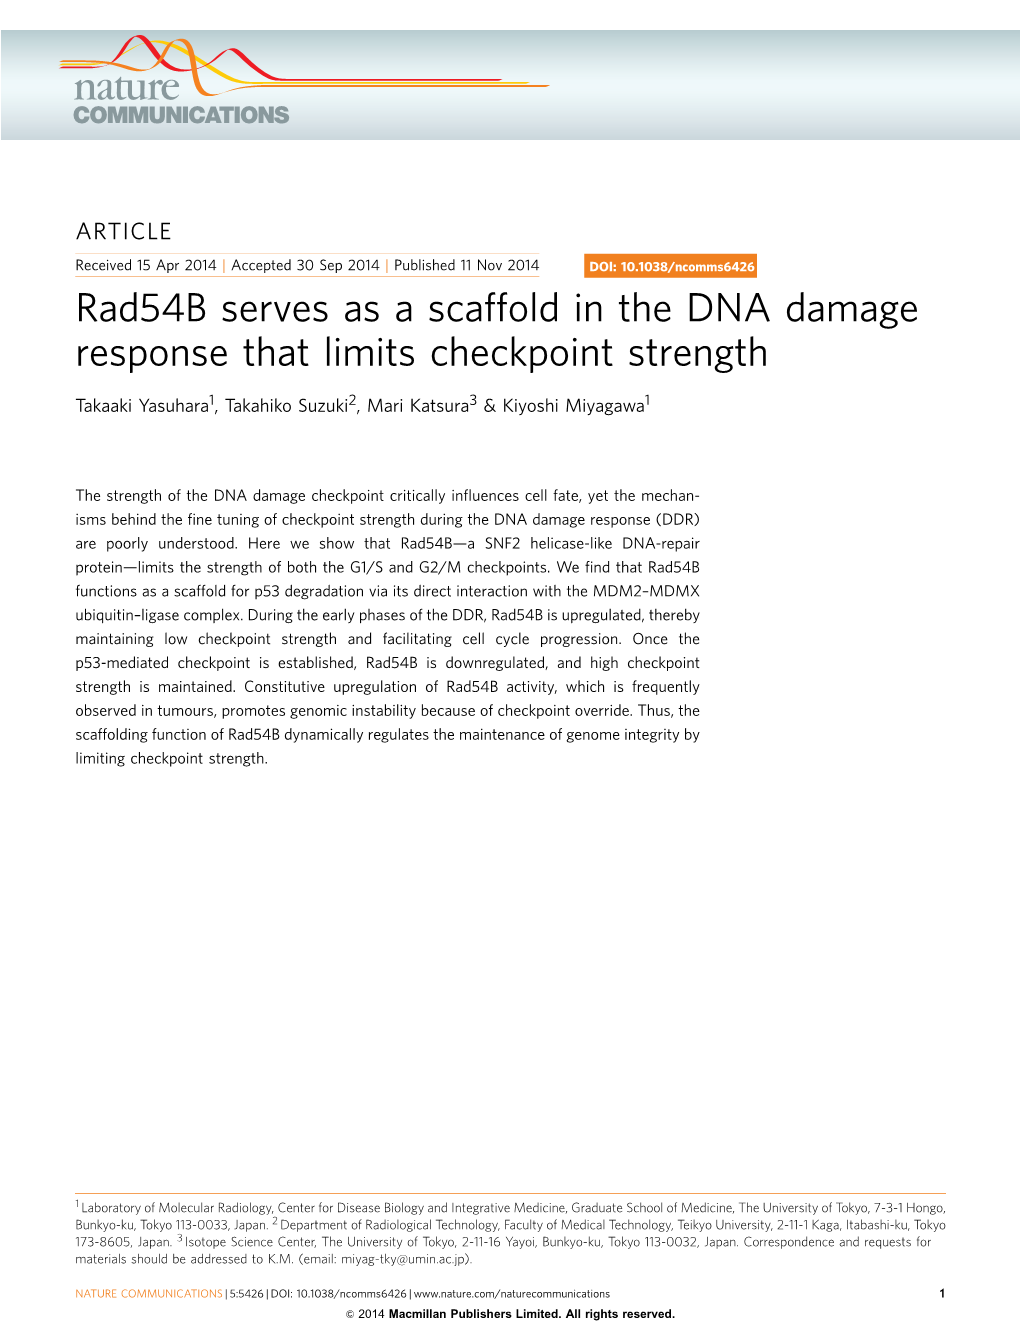 Rad54b Serves As a Scaffold in the DNA Damage Response That Limits Checkpoint Strength